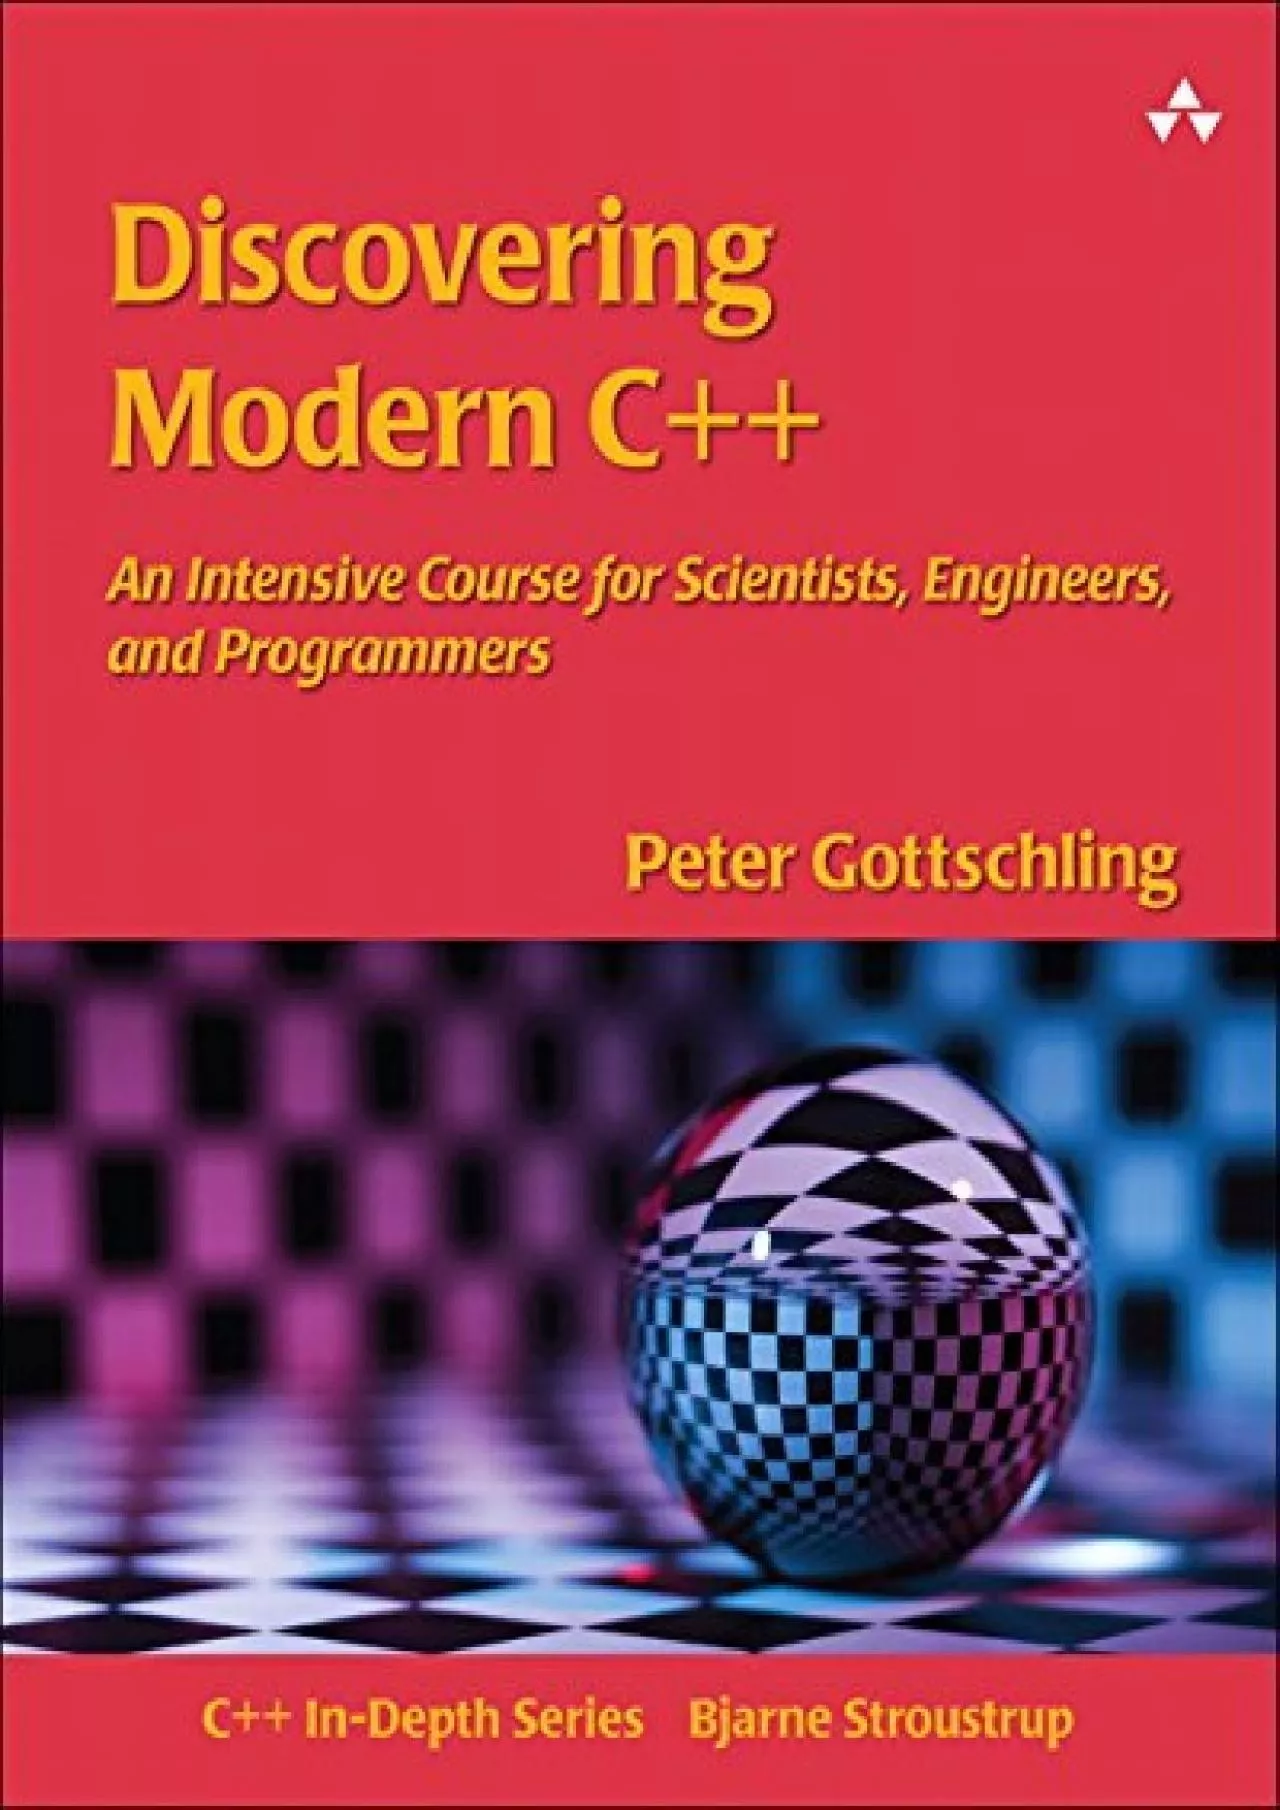 [BEST]-Discovering Modern C++: An Intensive Course for Scientists, Engineers, and Programmers